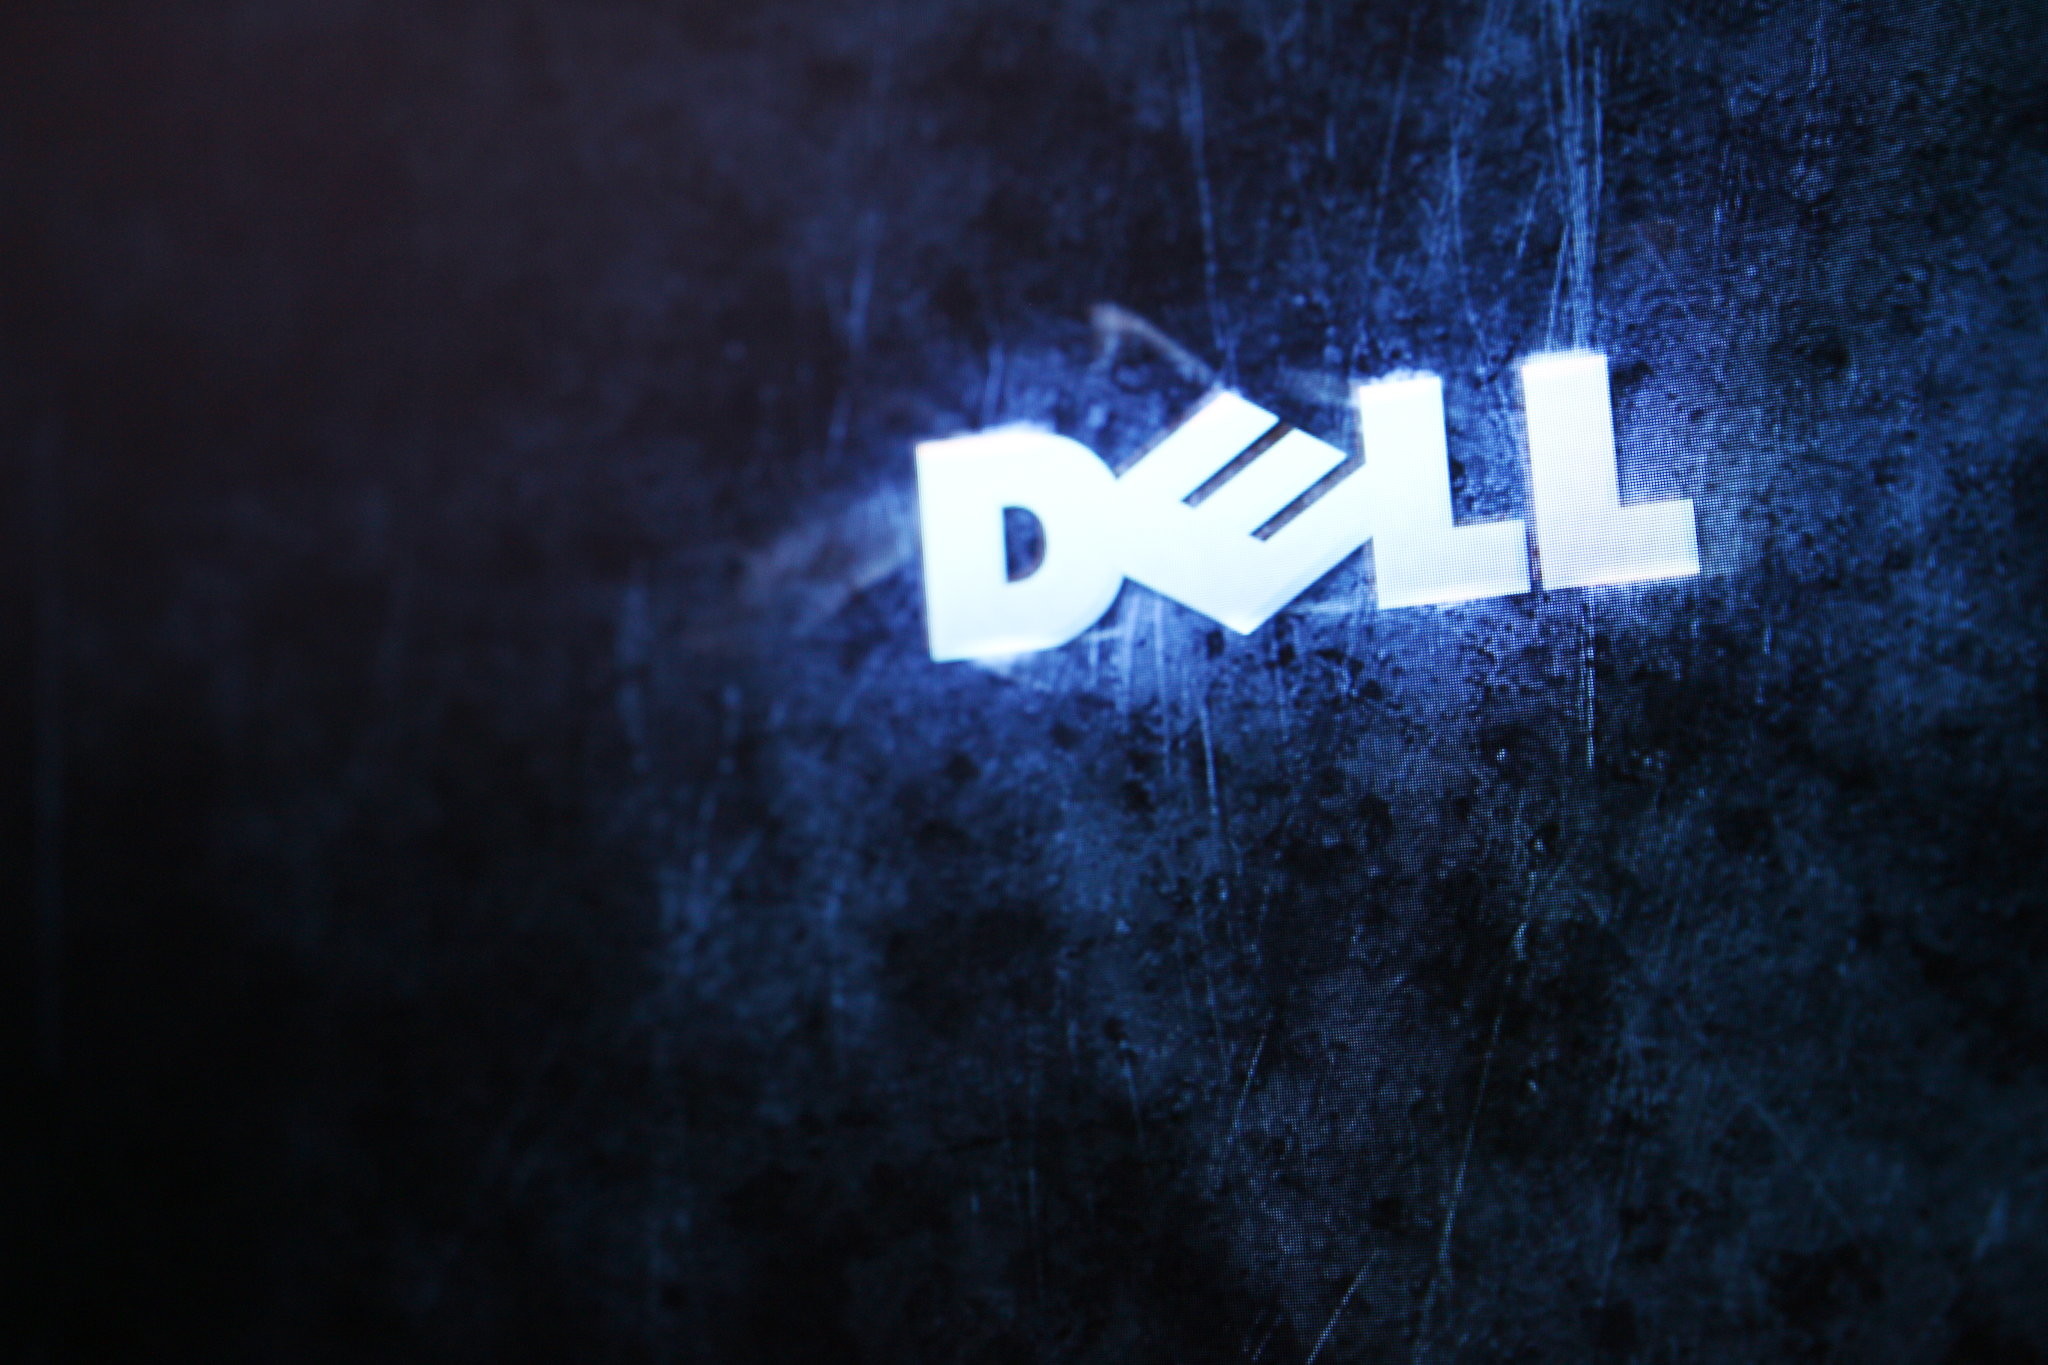 2048x1365 HD Dell Backgrounds Dell Wallpaper Images For Windows